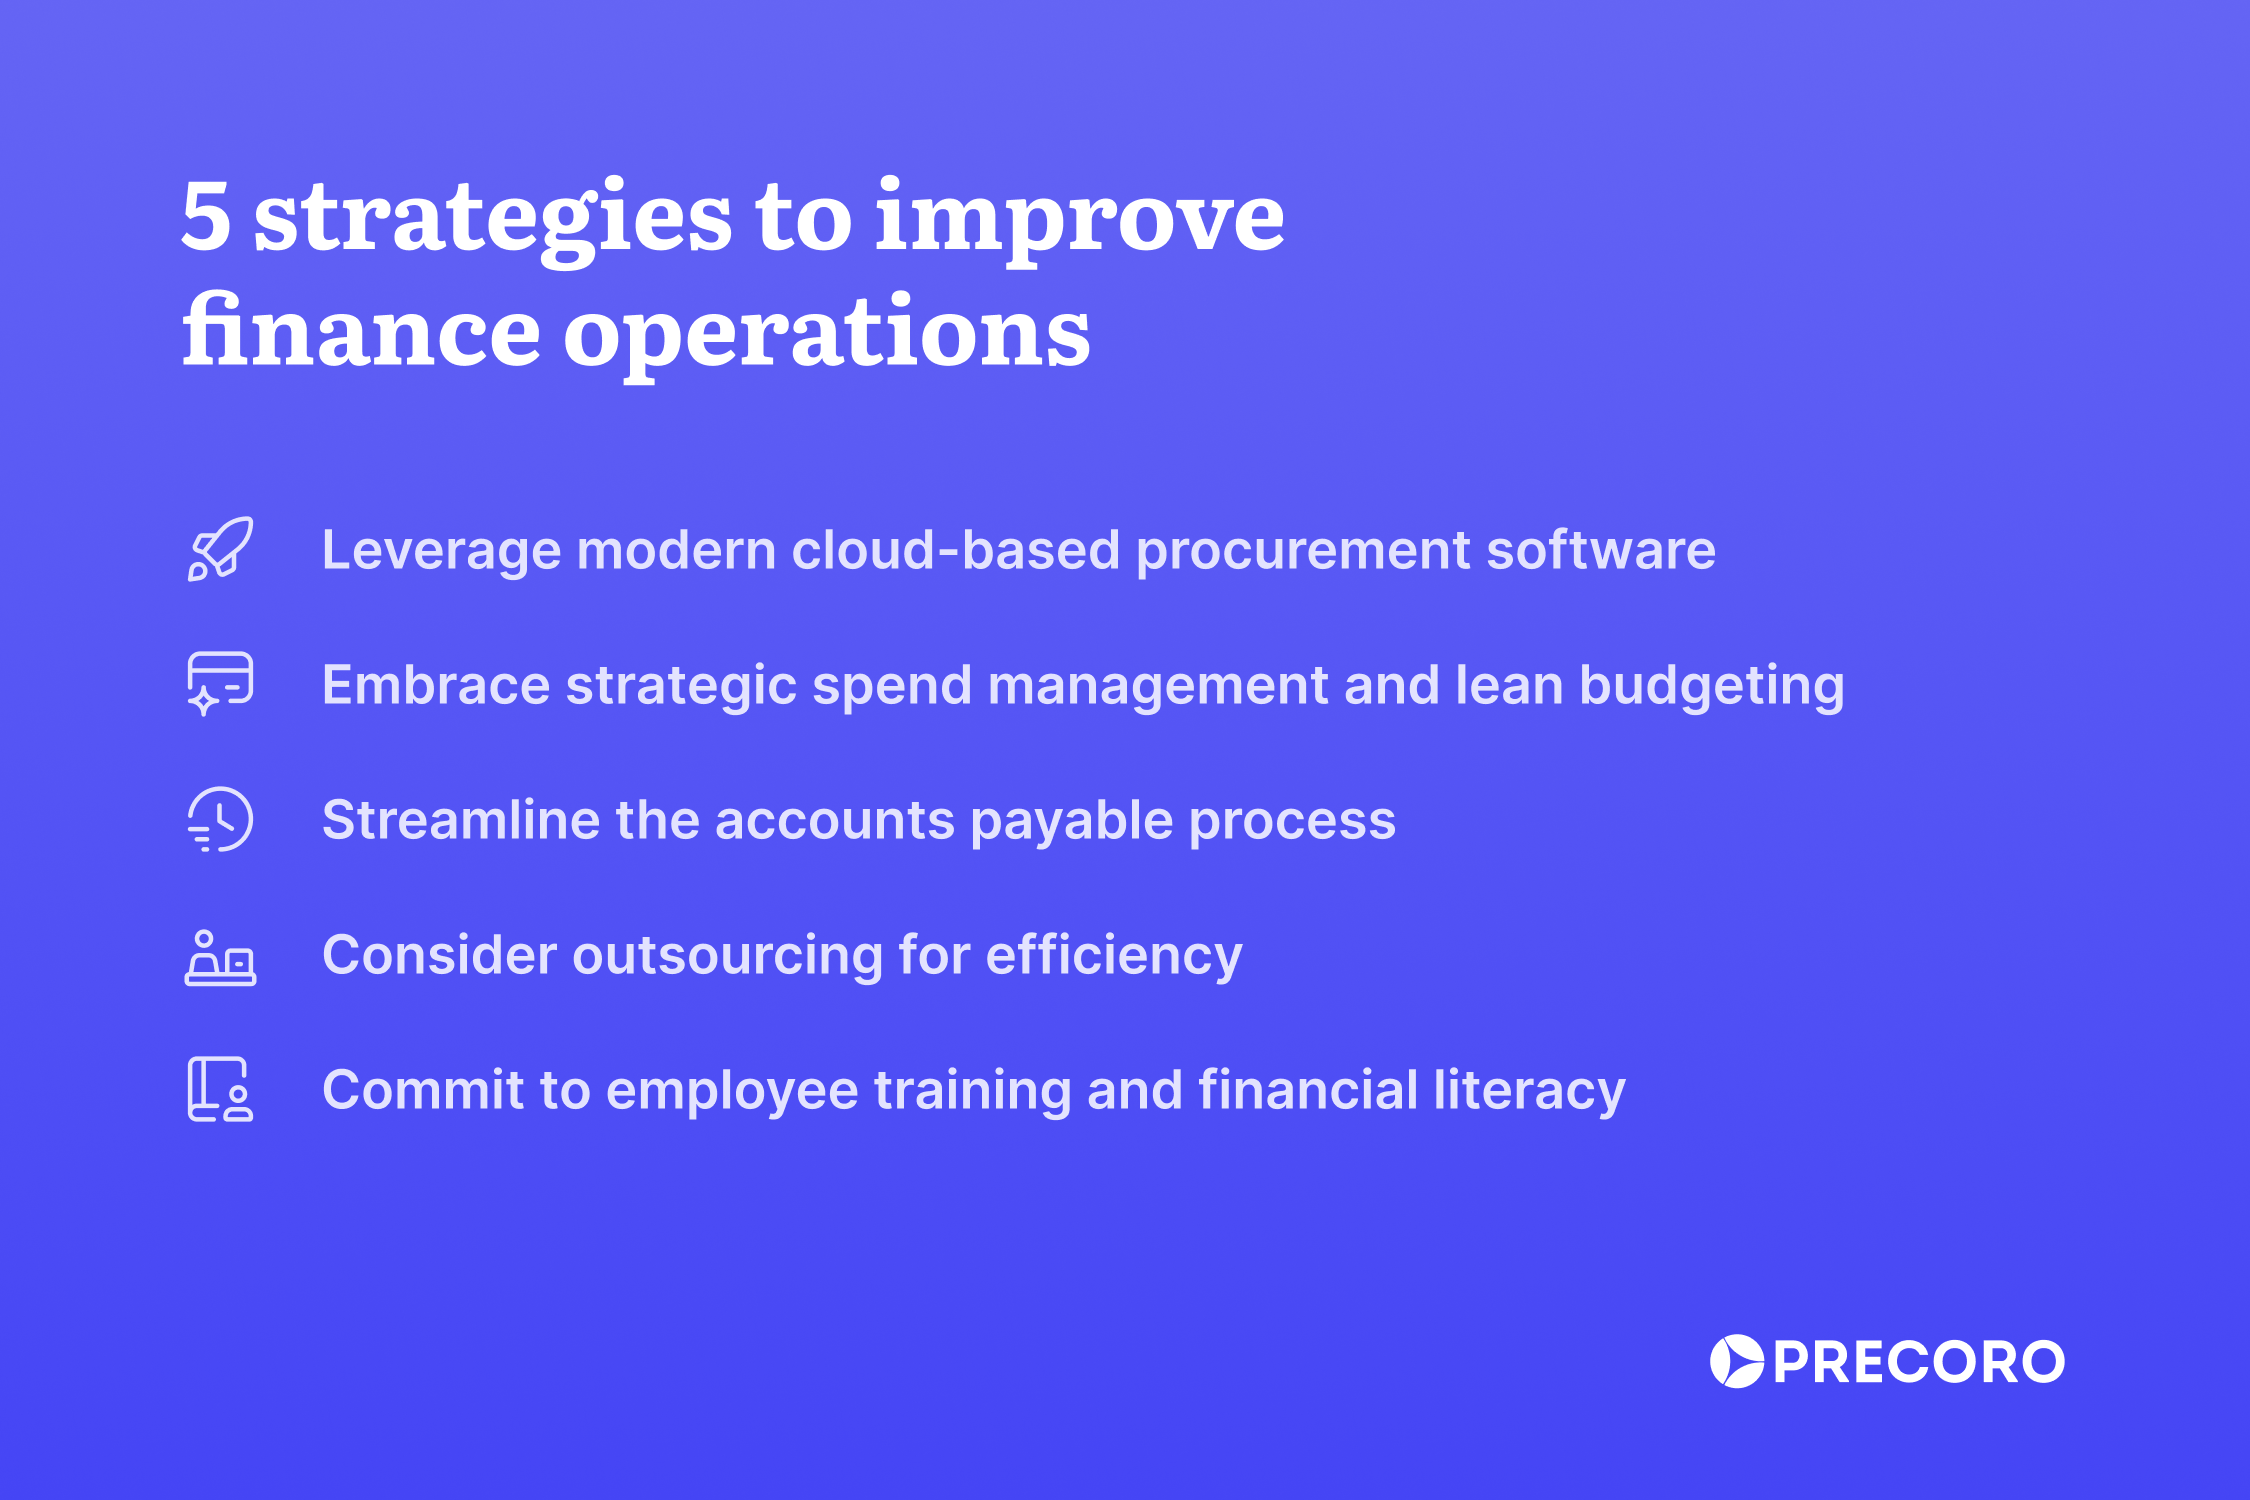 5 Ways to Improve Finance Operations for SMBs